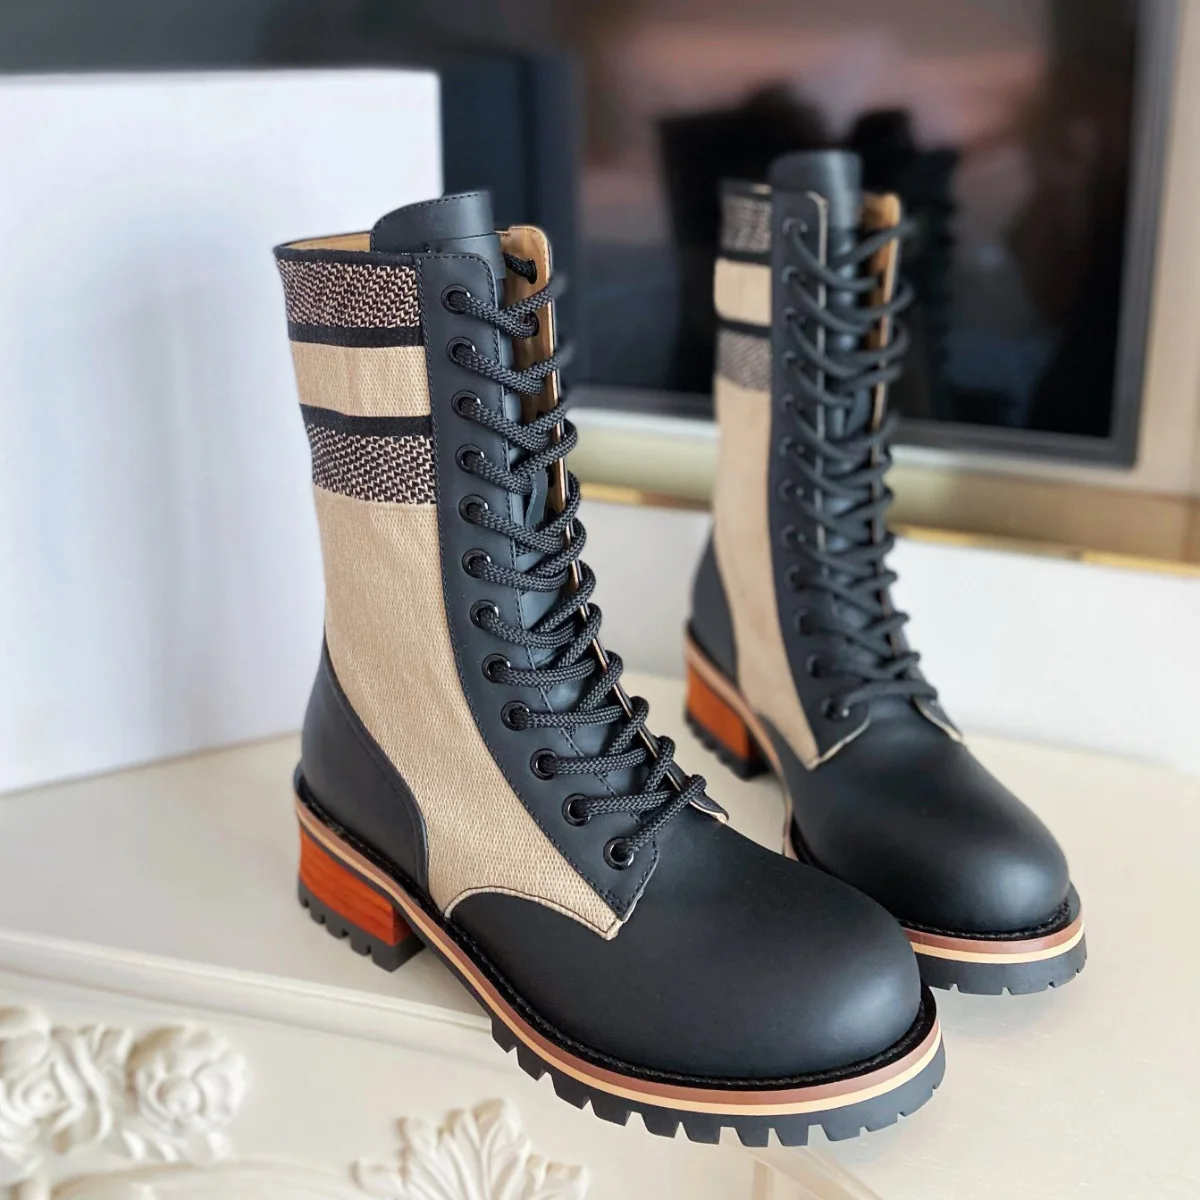 

Beige leather women's Motorcycle Boots Luxury Lace-Up low heel Round Toe mid-calf combat martin booties embossed logo shoes